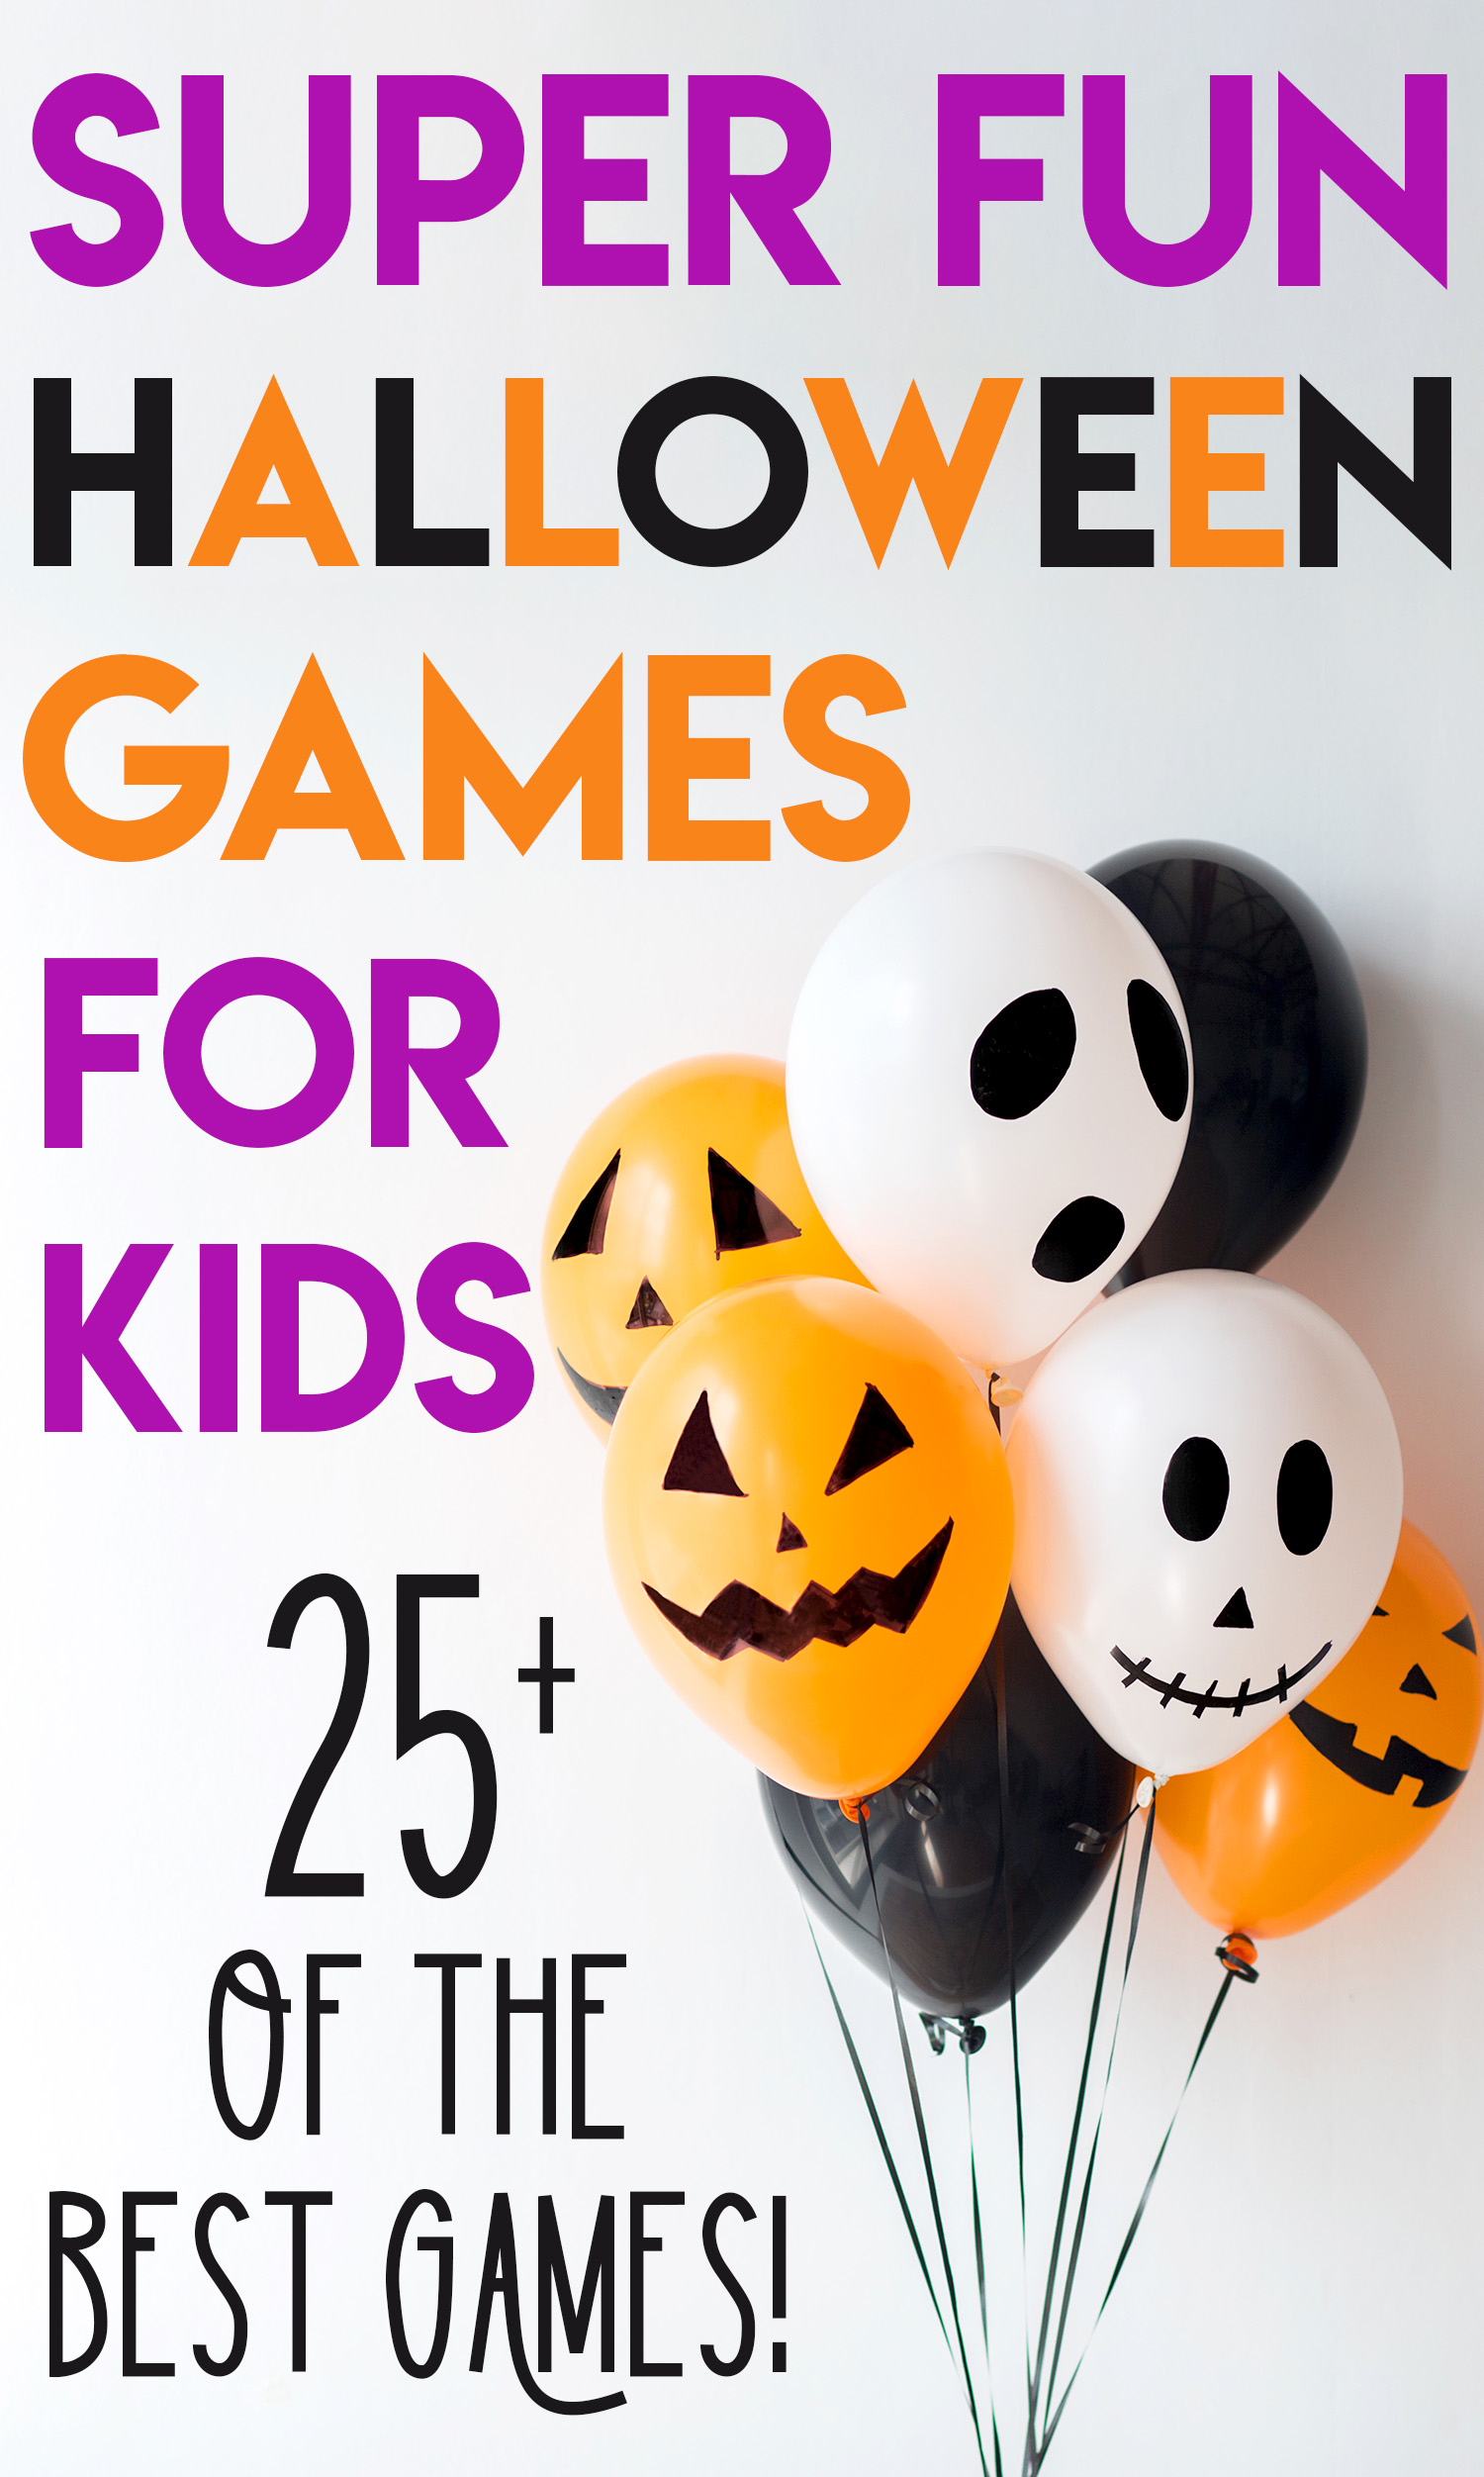 Games For Kids Halloween Party